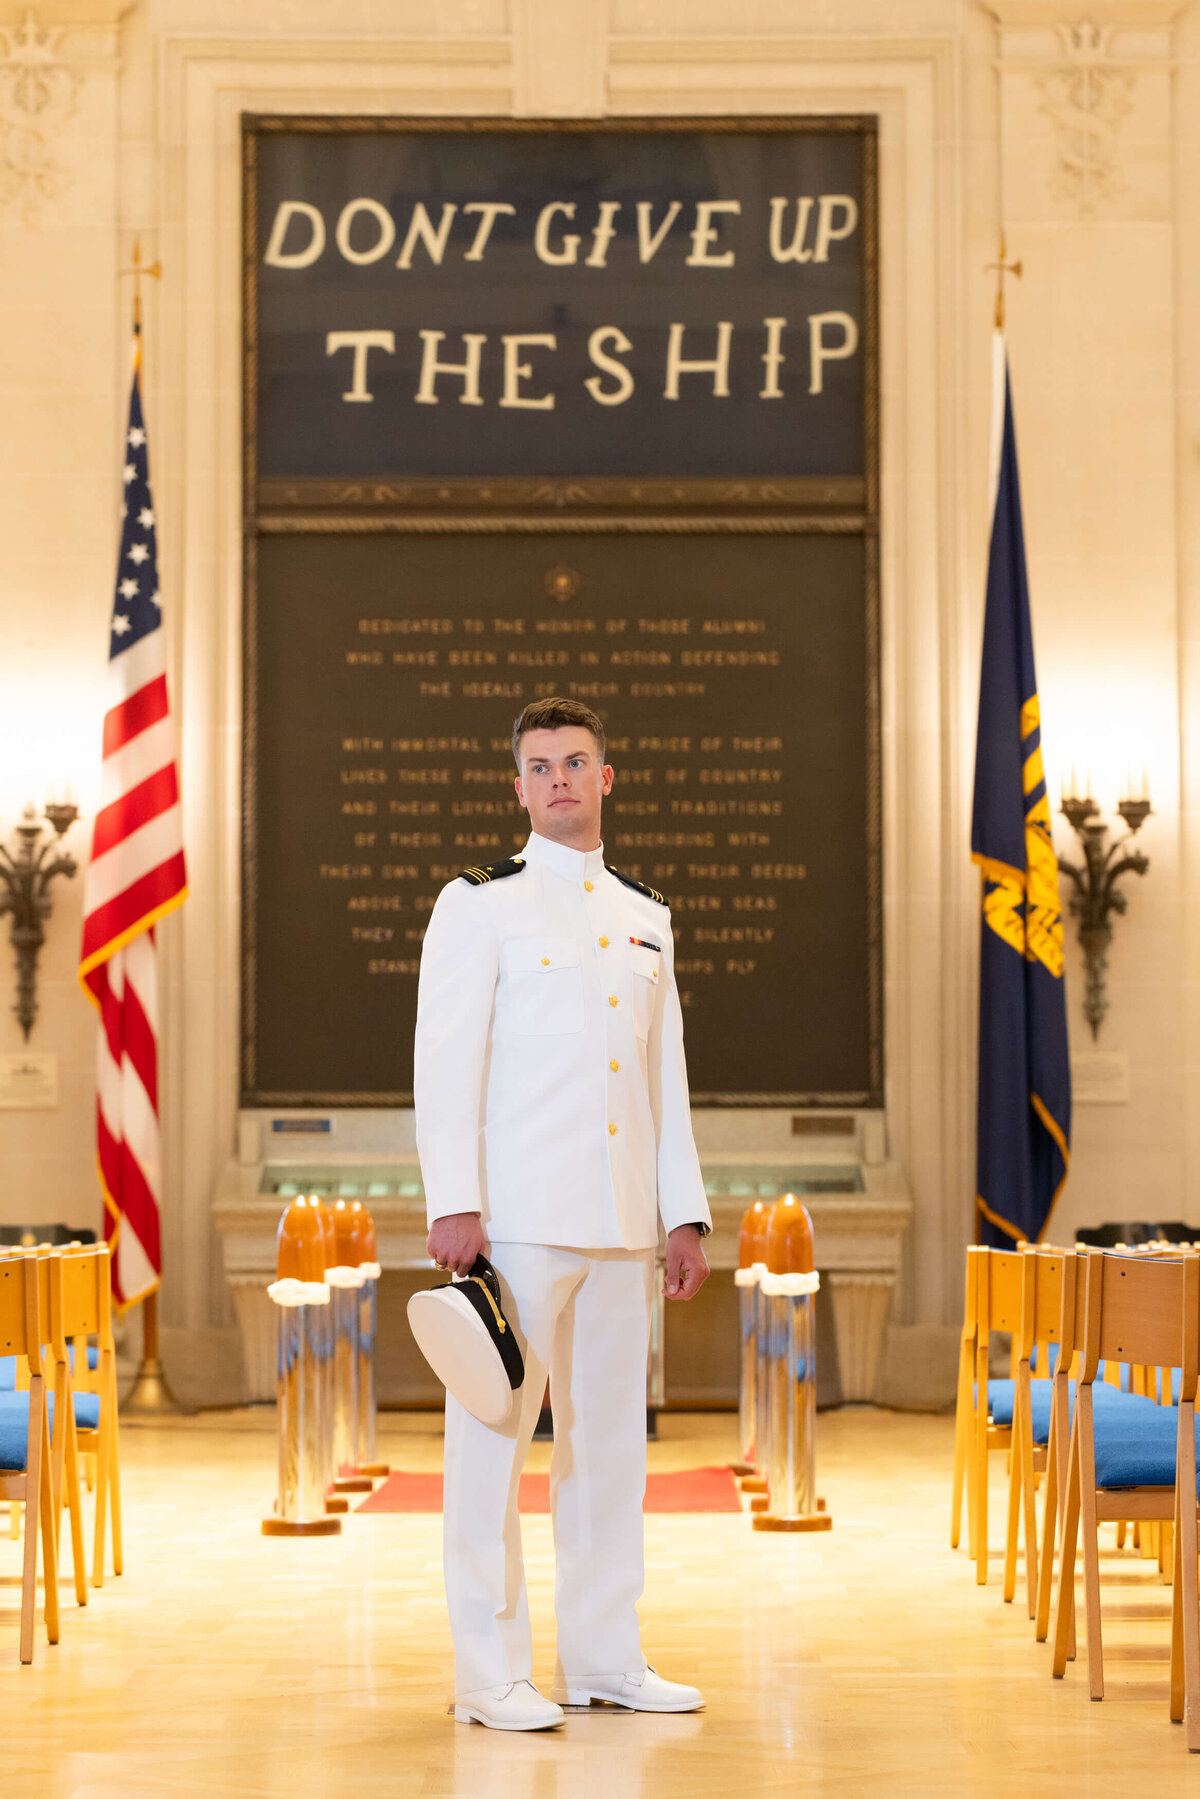 Kelly Eskelsen takes photo of USNA  graduate in white uniform standing in reverence at Memorial Hall at the Naval Academy in Annapolis, Maryland.